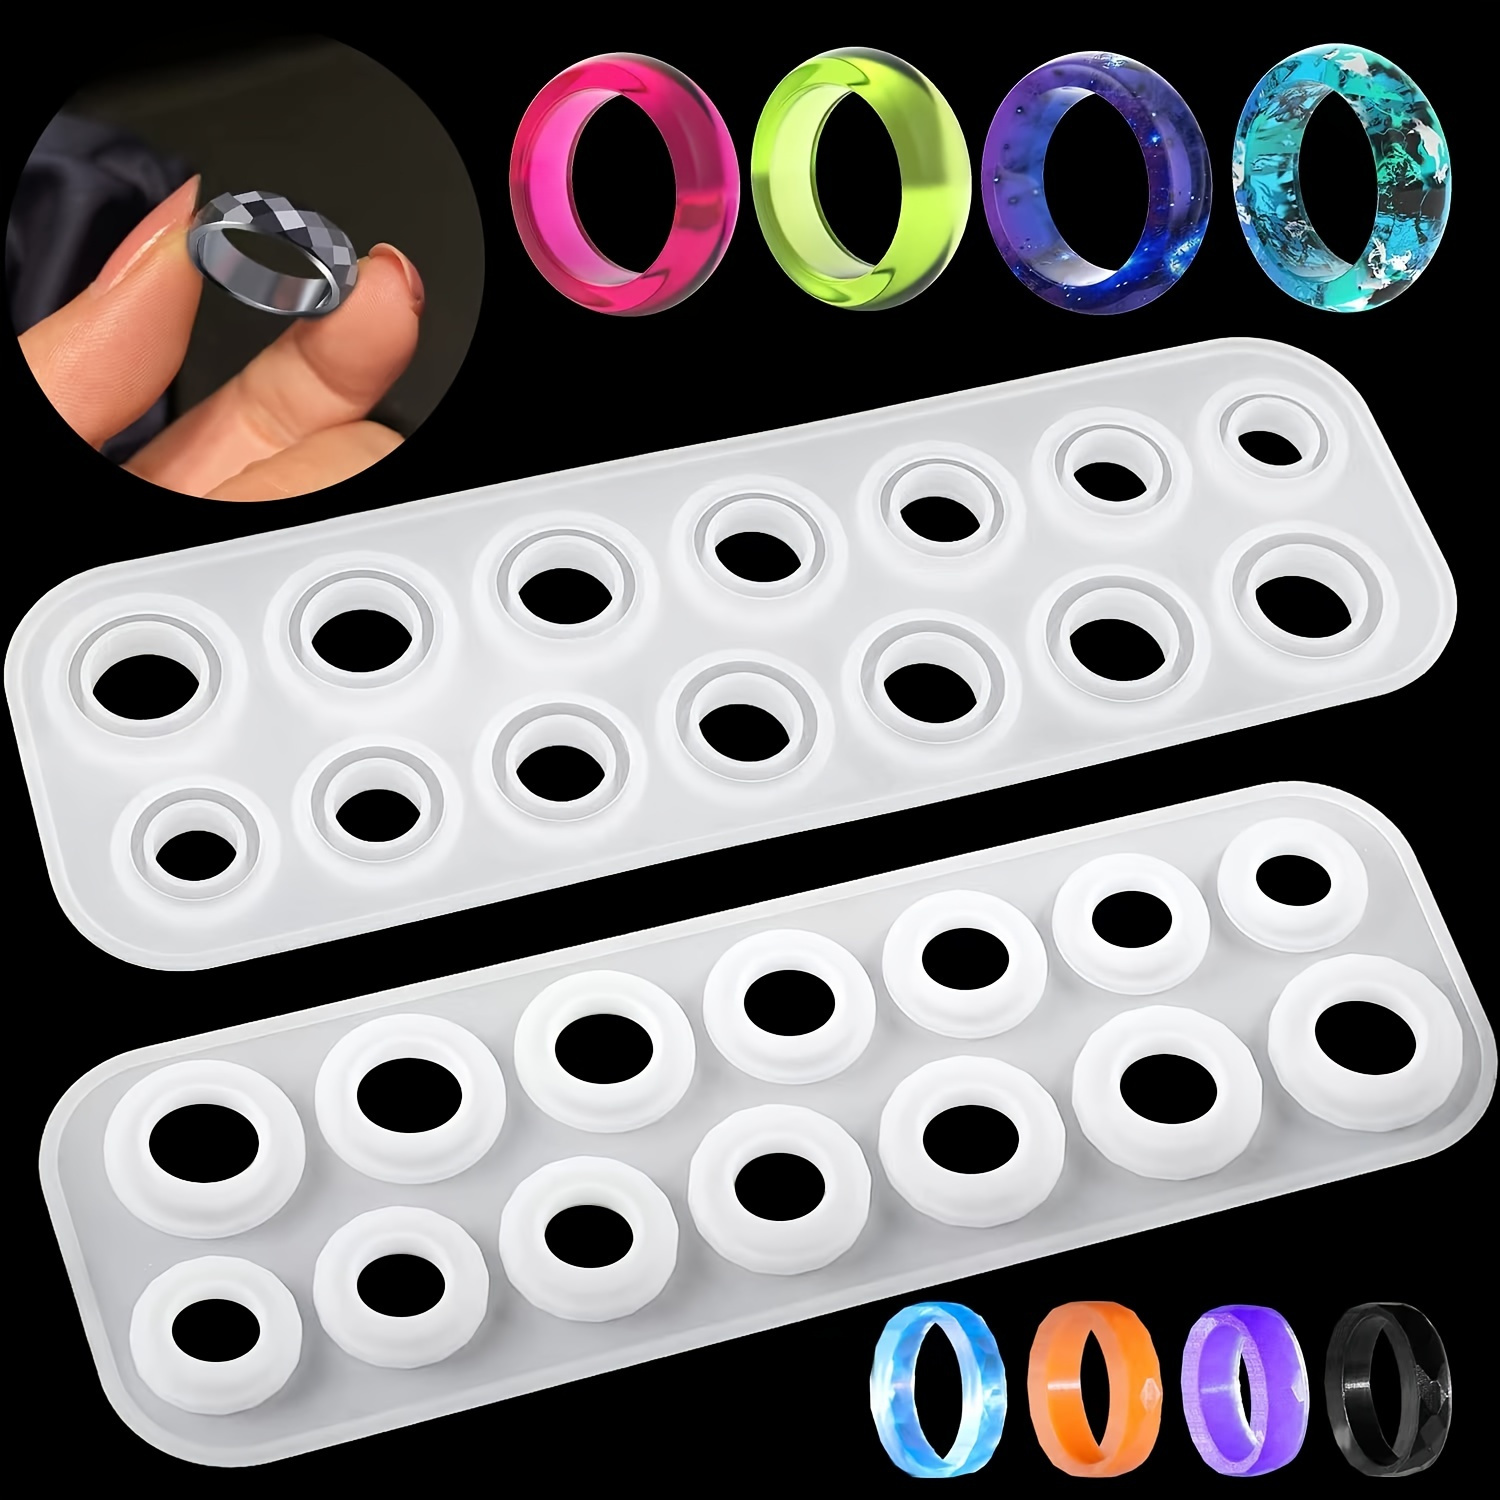 

Resin Ring Molds Silicone, Silicone Molds For Epoxy Resin, Resin Molds 14 Sizes With Round And Rhombic Faces For Making Rings, Earrings, Pendants, Crafts For Christmas Gifts